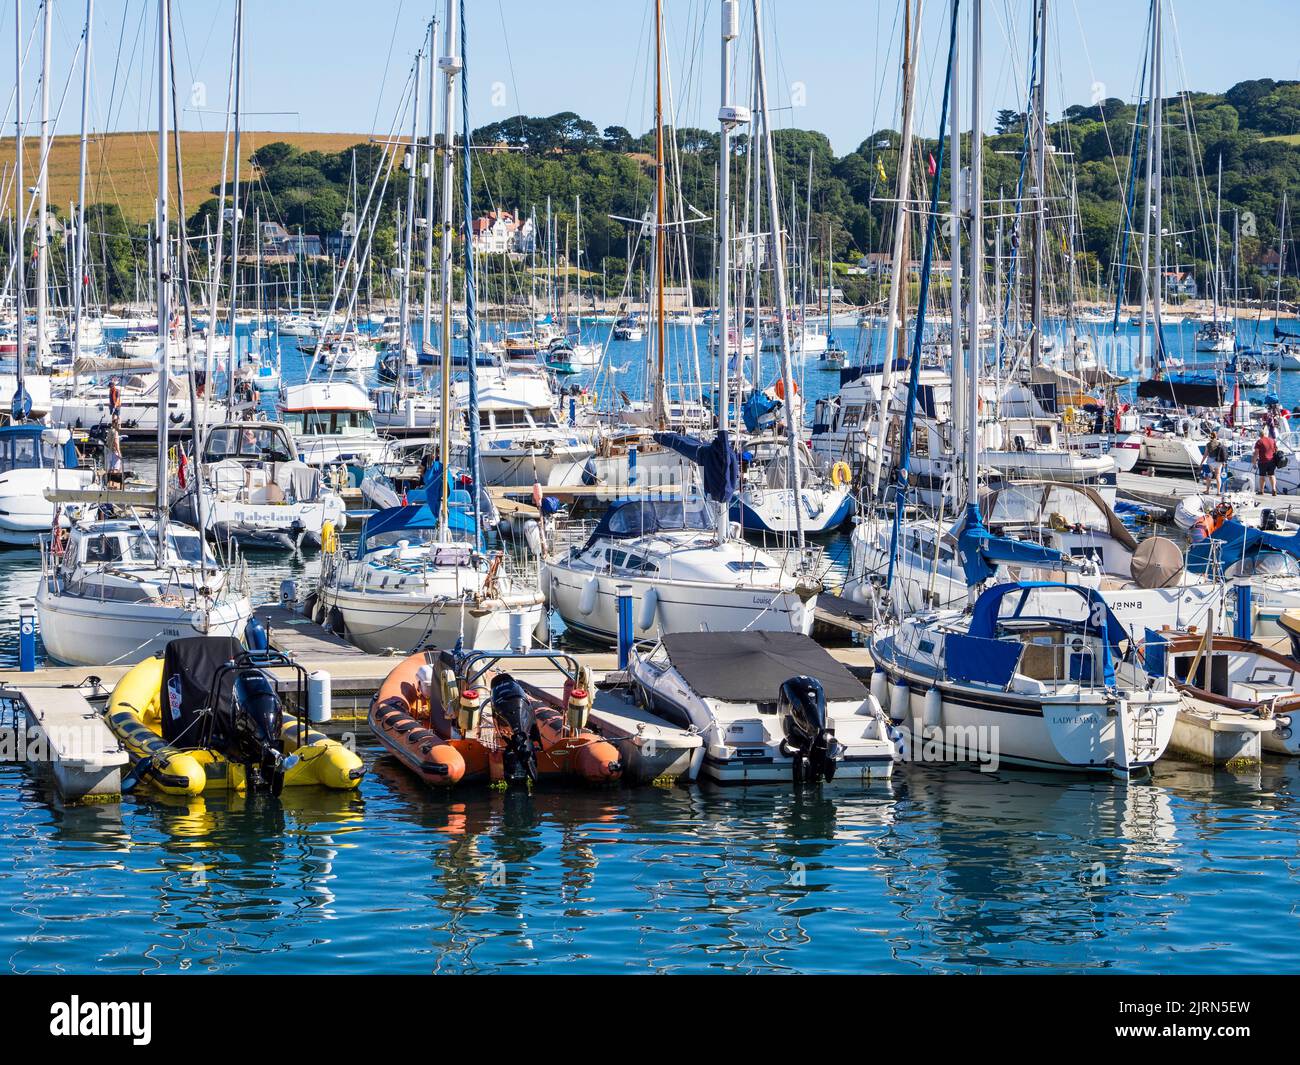 Ribs and Yachts at Falmouth Harbour, Falmouth, Cornouailles, Angleterre, Royaume-Uni. Banque D'Images